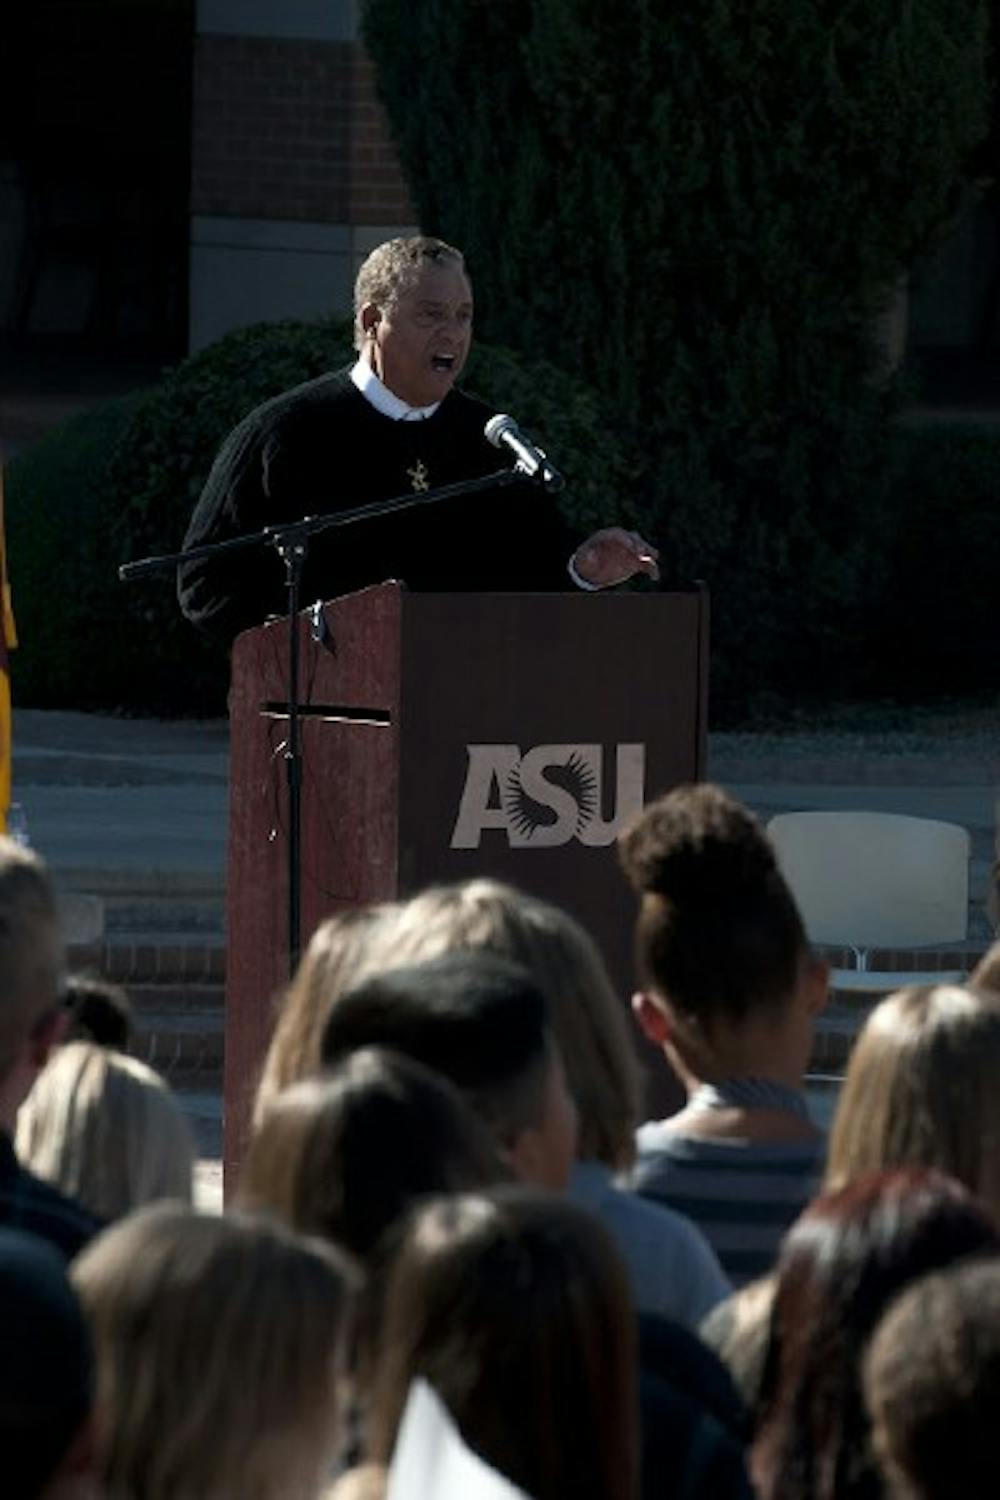 On Wednesday Jan. 22, at ASU's West Campus, hundreds of elementary students gather to watch Charles St. Clair reenact MLK’s “I Have a Dream Speech" that took place over a half a century ago in the nations capitol.  (Photo by Mario Mendez)